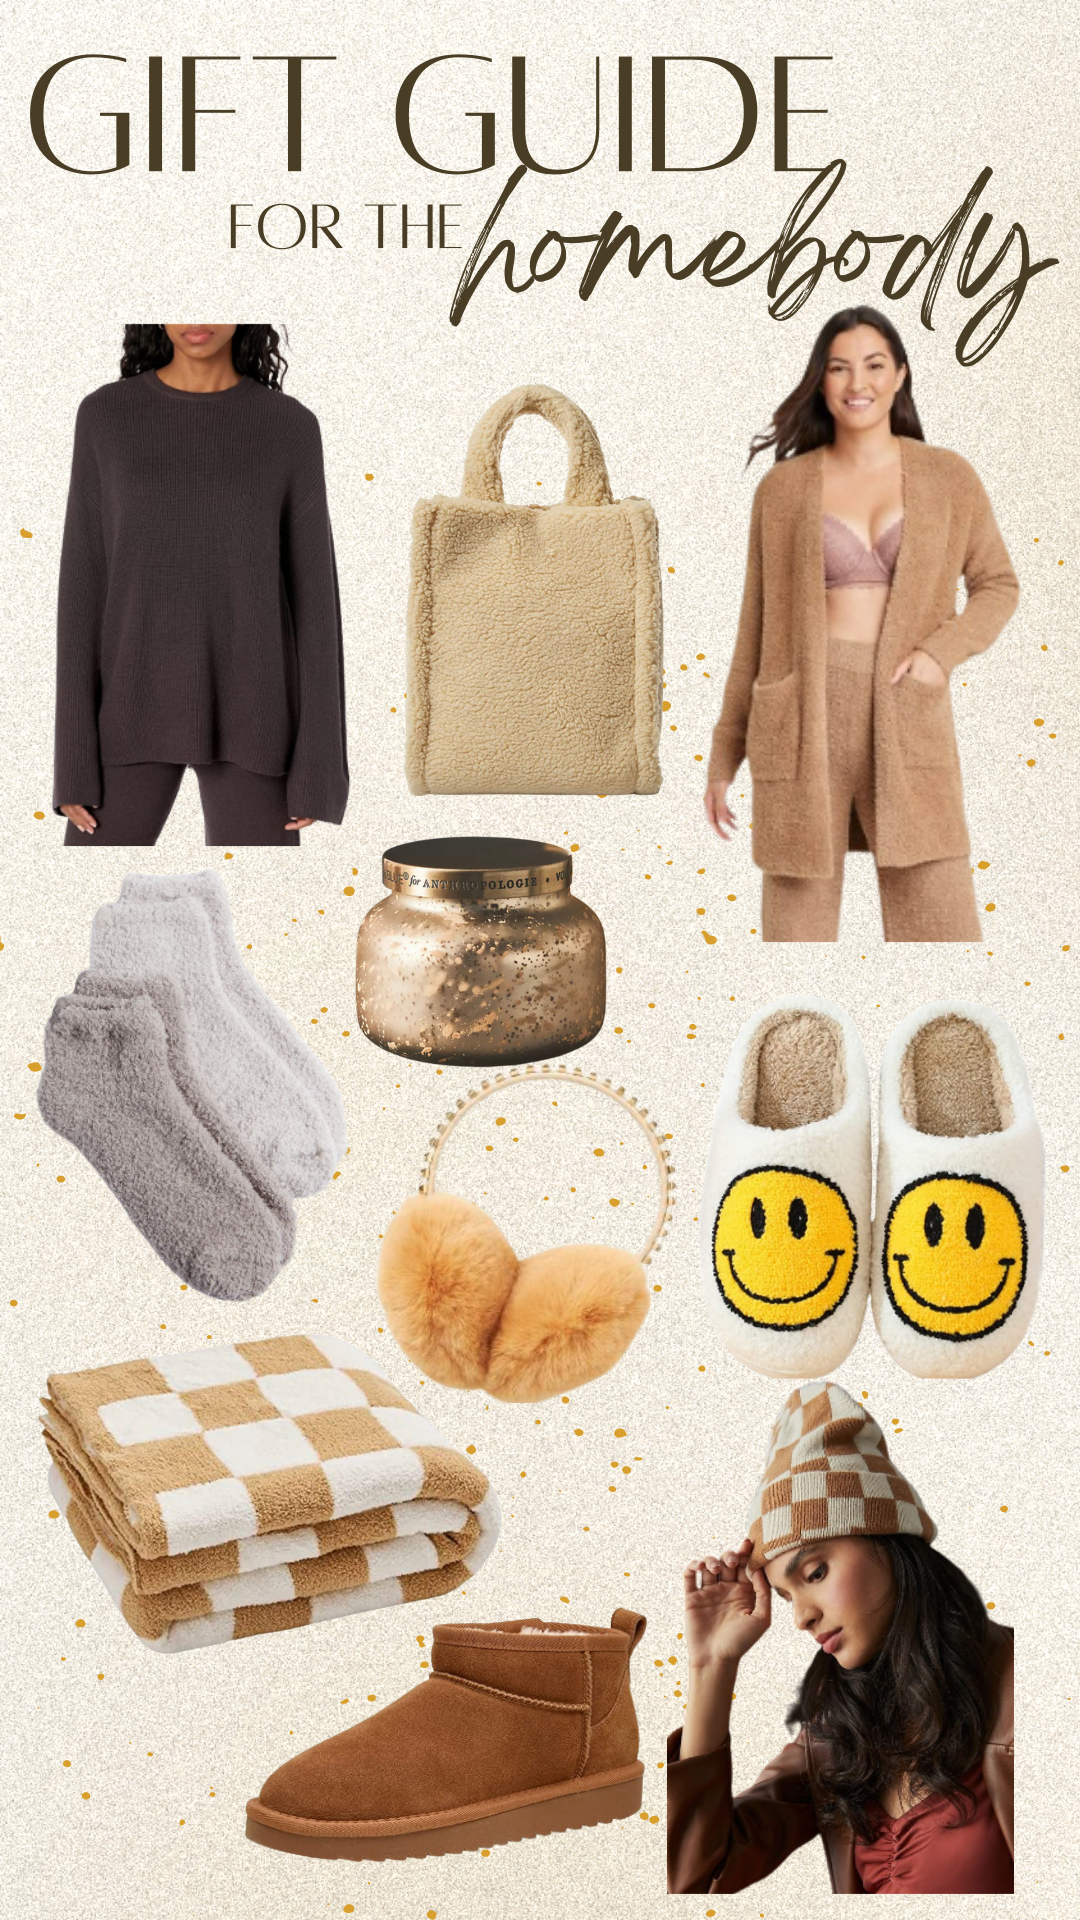 Holiday Gift Guide-Jacyln De Leon Style. Holiday gift guide for the homebody. Cozy holiday gifting for the homebody.